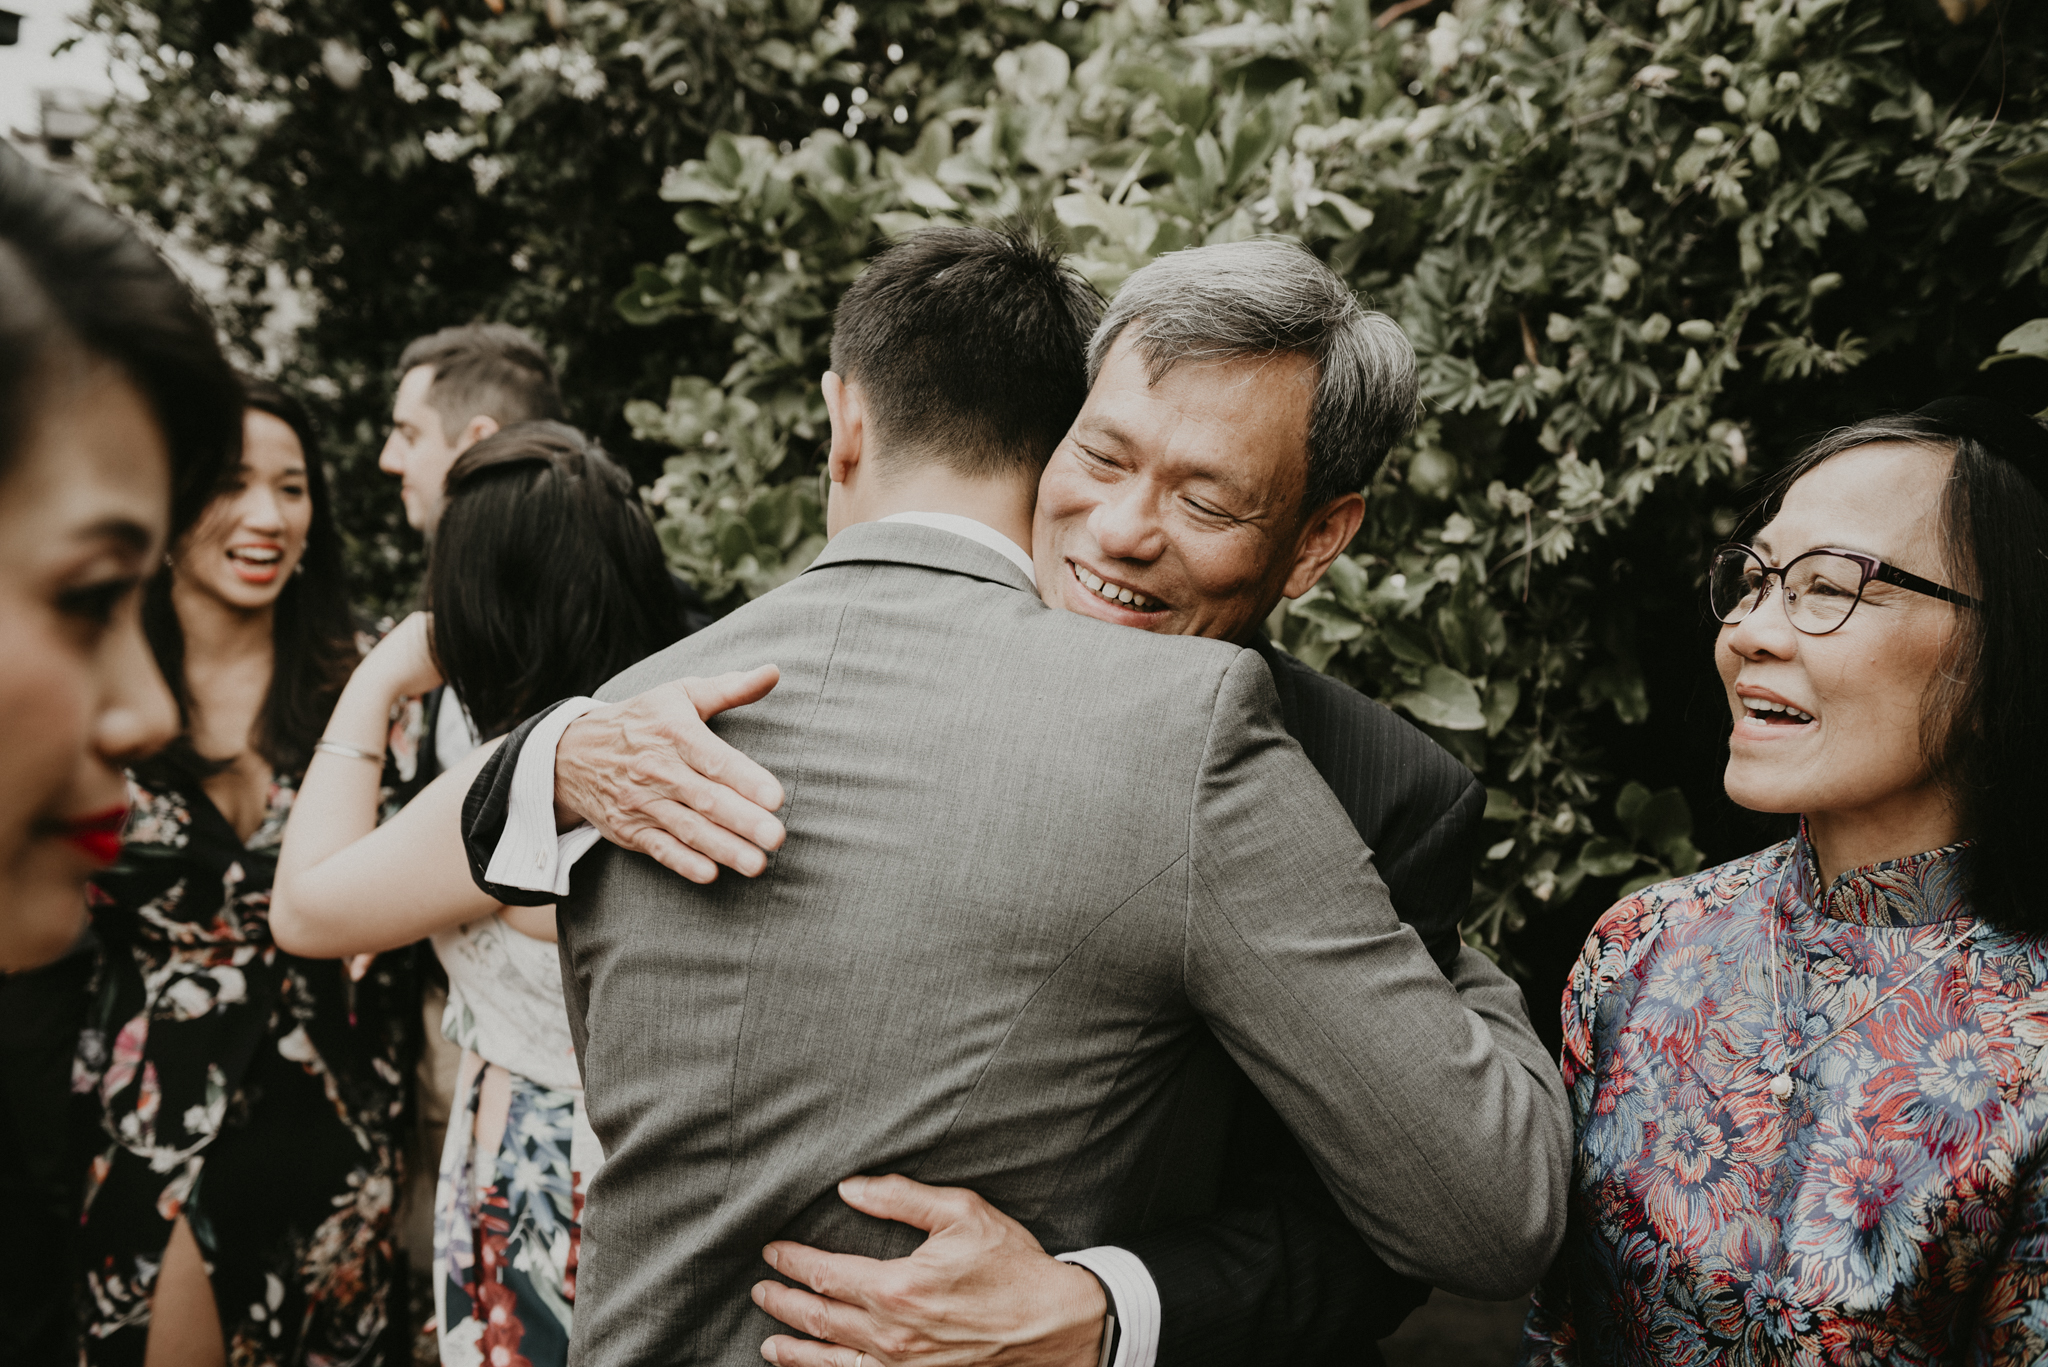 agnes-duy-15th-december-2018-chinese-vietnamese-wedding-tea-ceremony-yarraville-home-house-documentary-candid-photographer-sarah-matler-photography-79